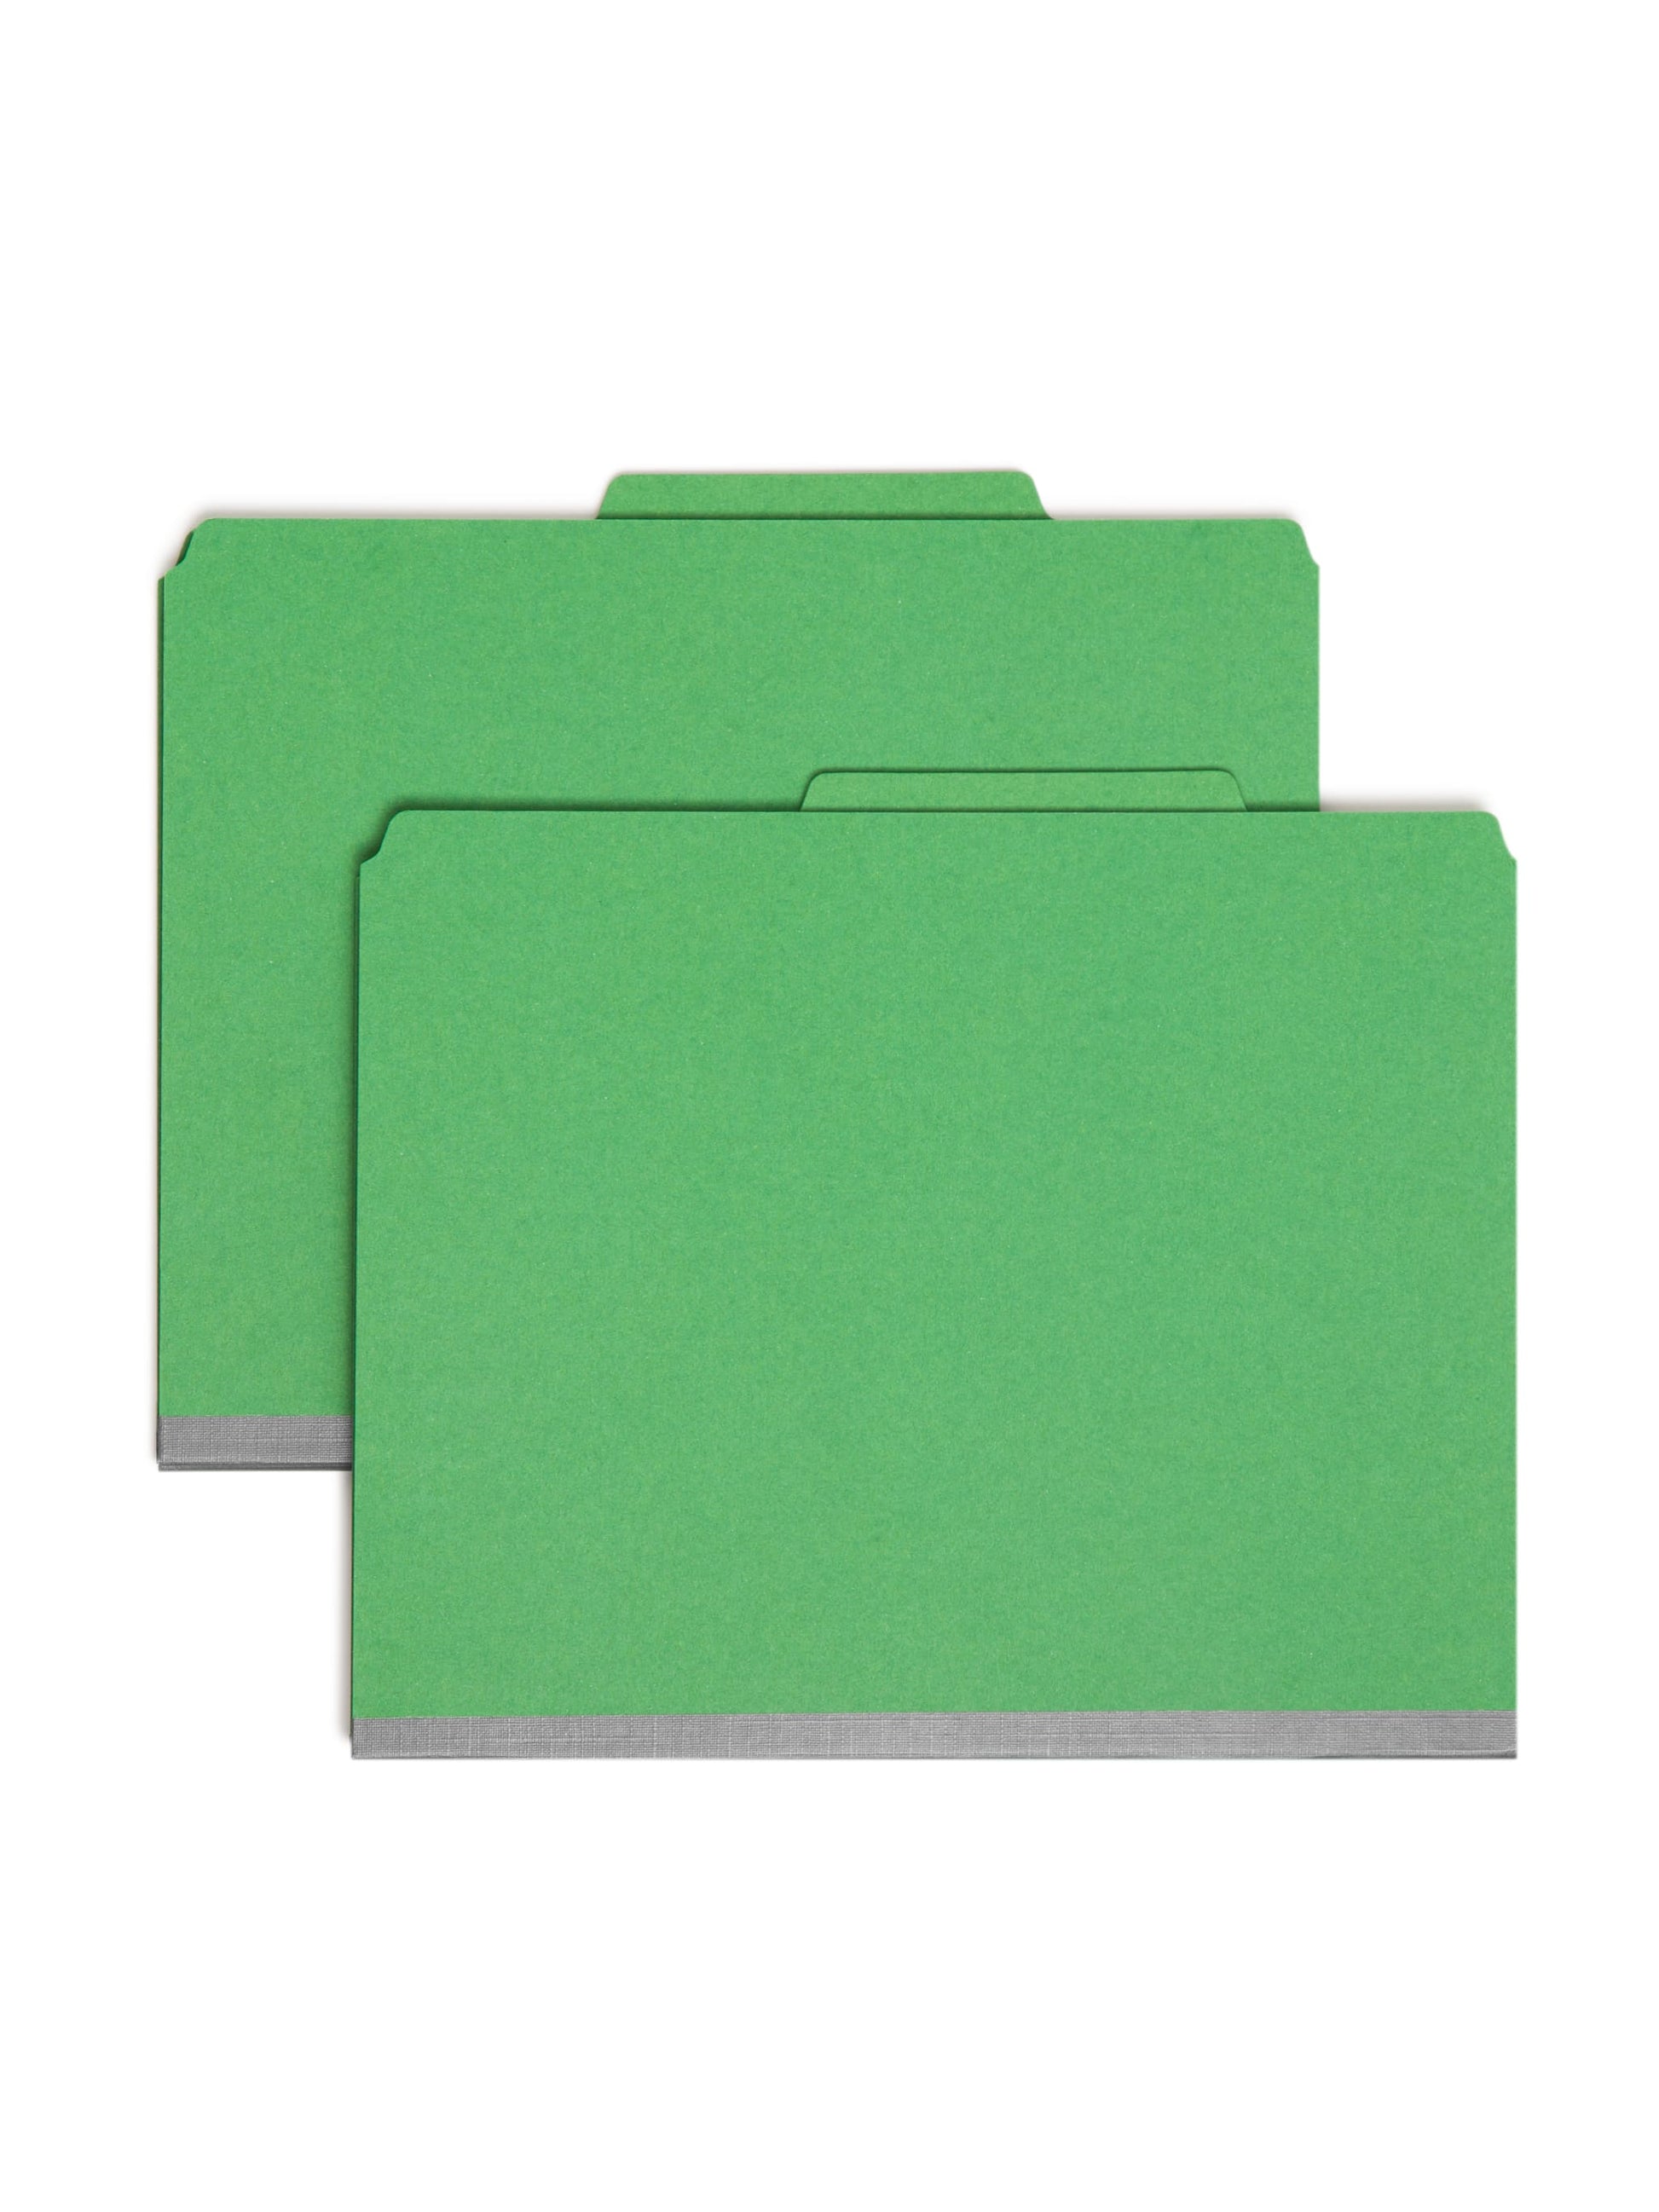 Pressboard Classification File Folders, 2 Dividers, 2 inch Expansion, Green Color, Letter Size, 